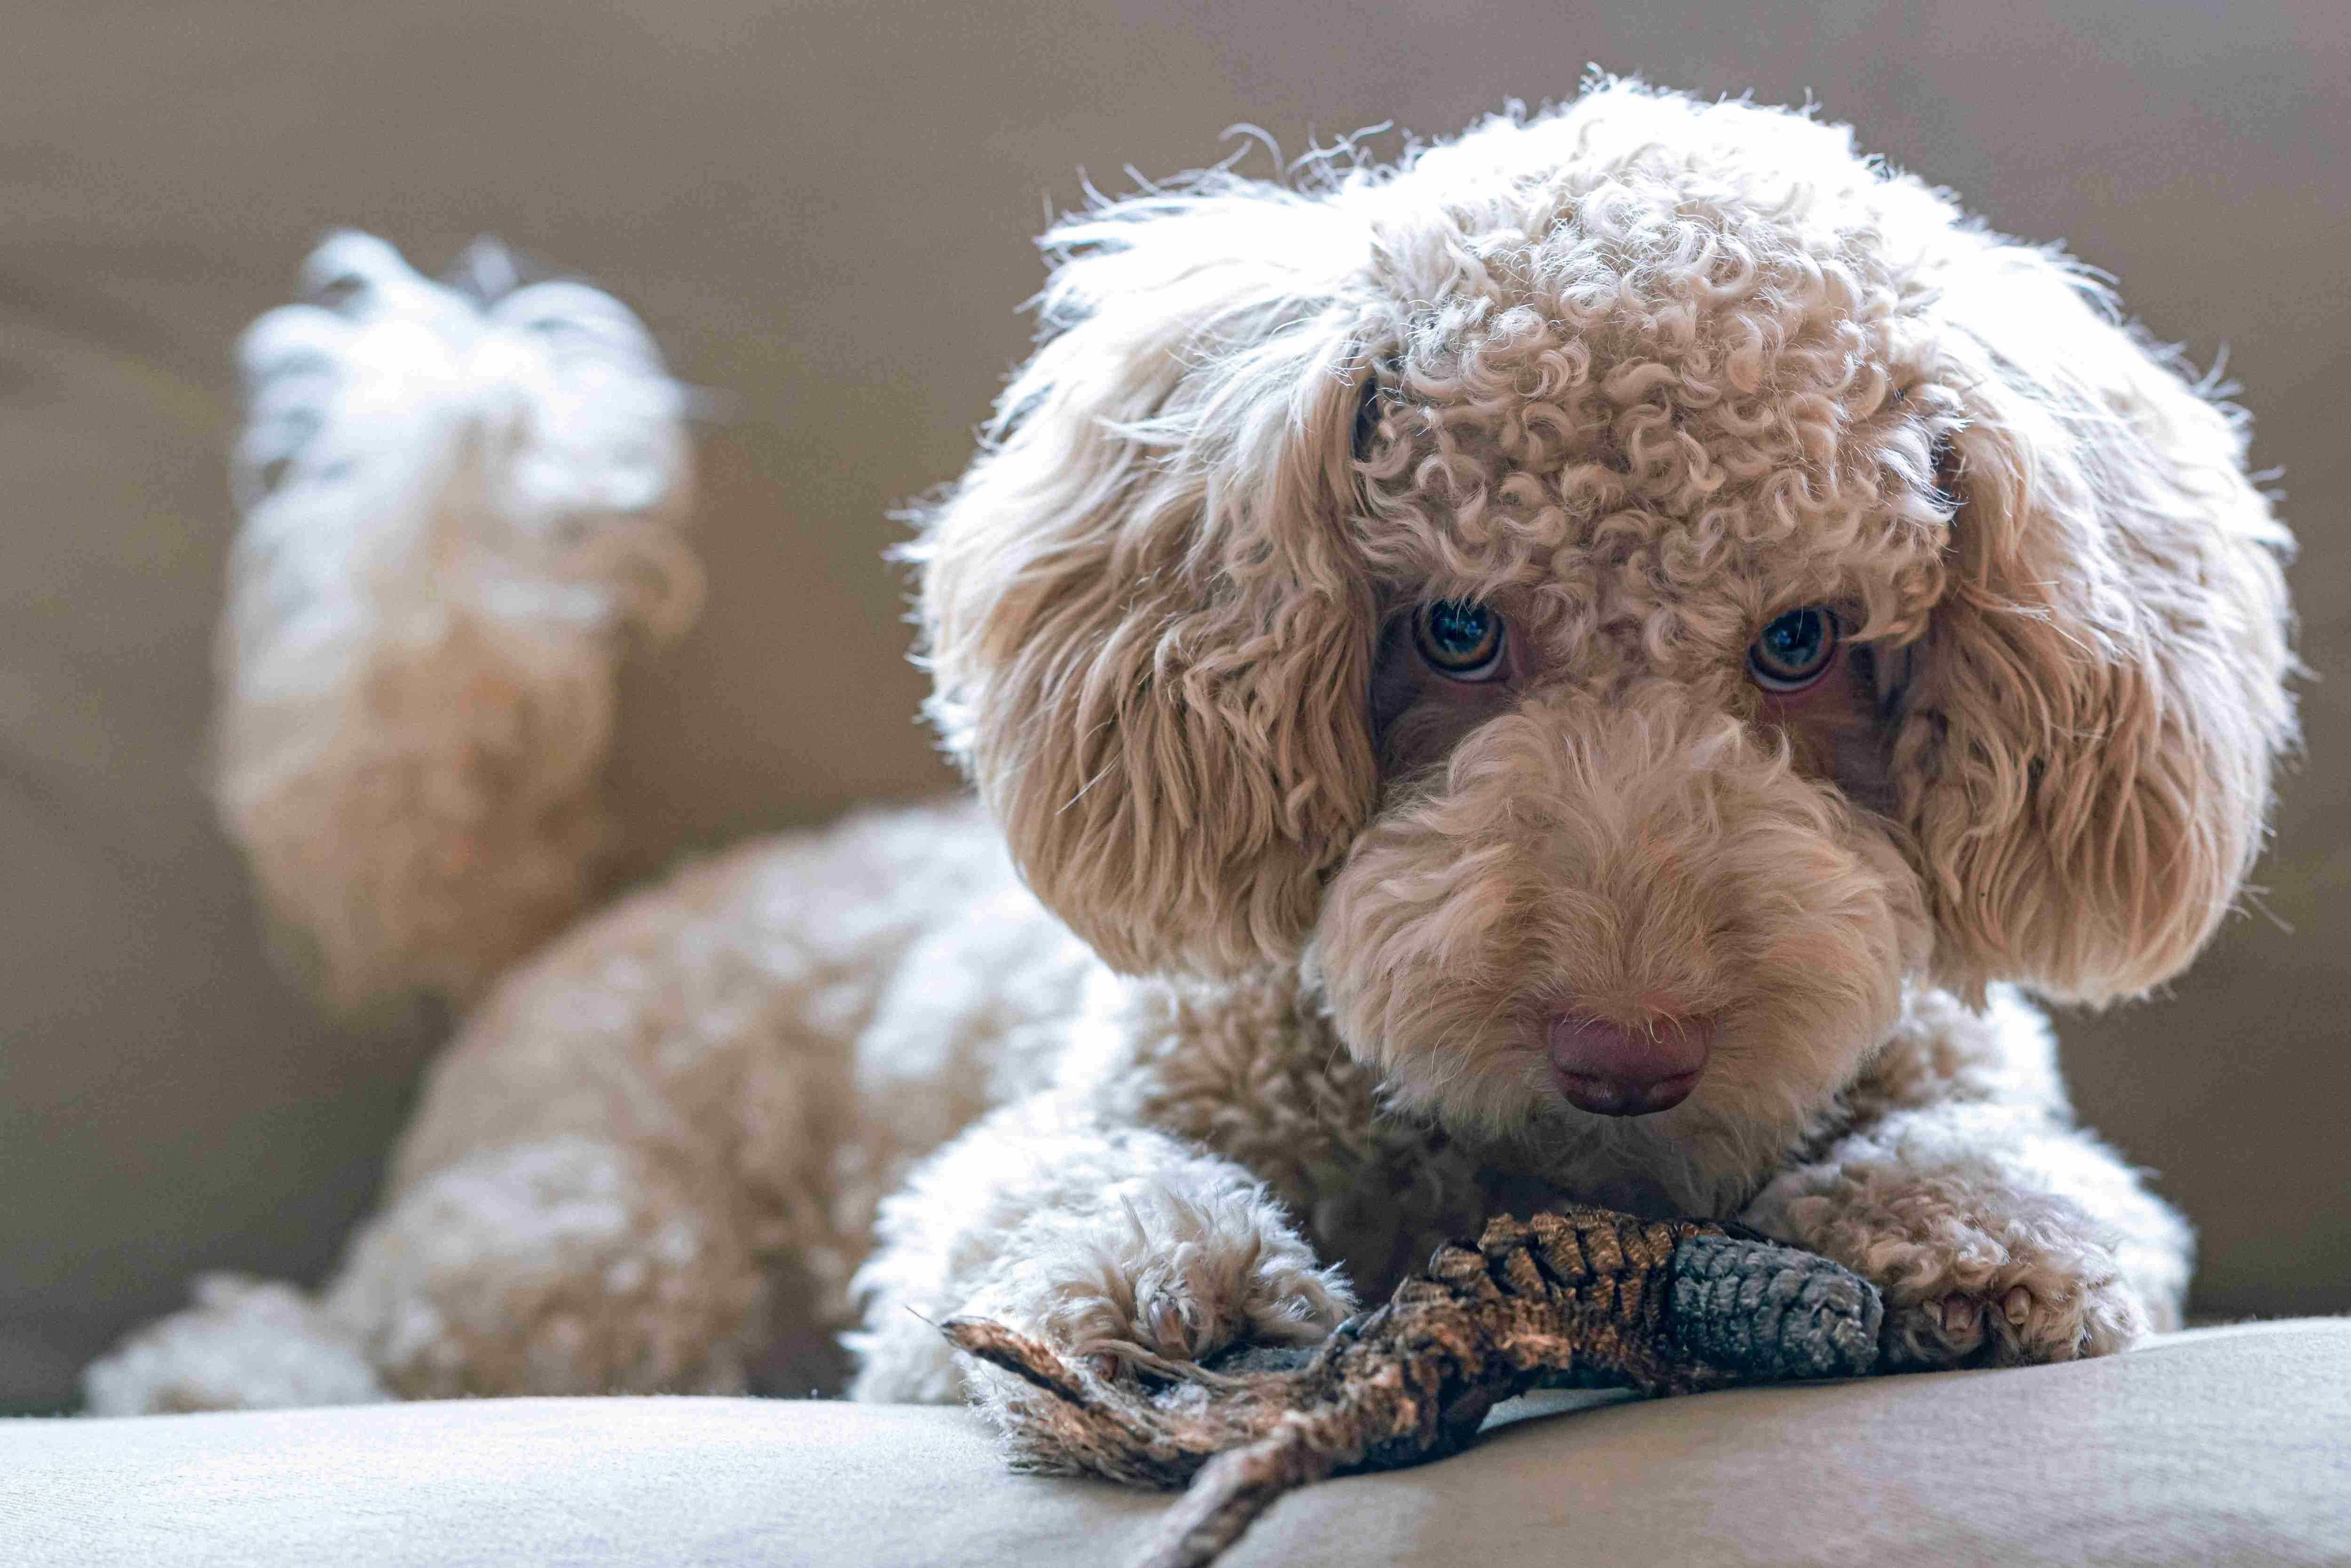 Did you have any concerns or apprehensions during the first two weeks with your Poodle puppy?